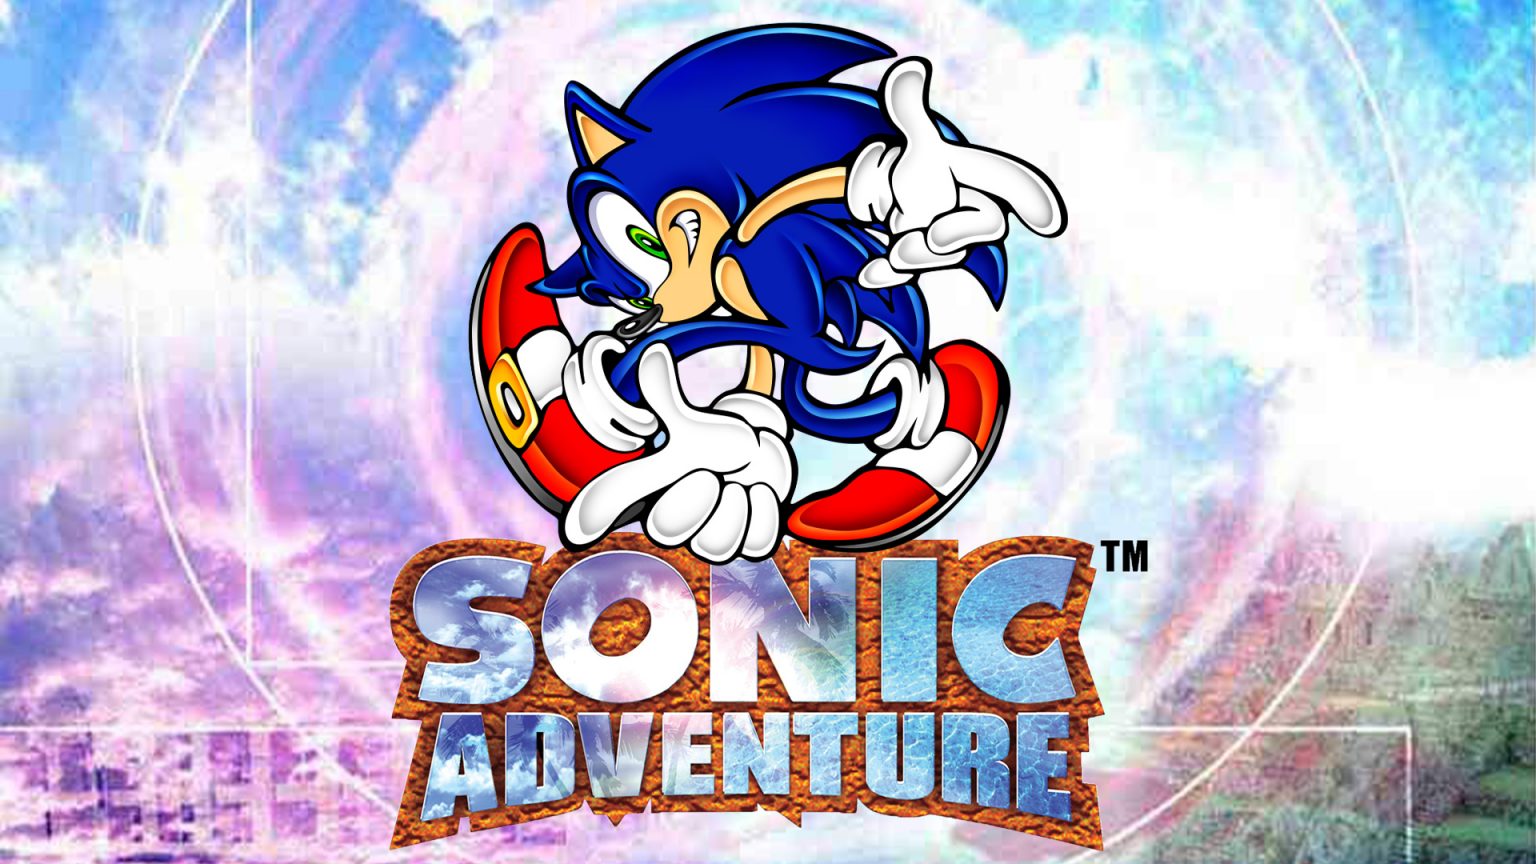 Sonic The Hedgehog Passion And Pride Anthems With Attitude From The Sonic Adventure Era